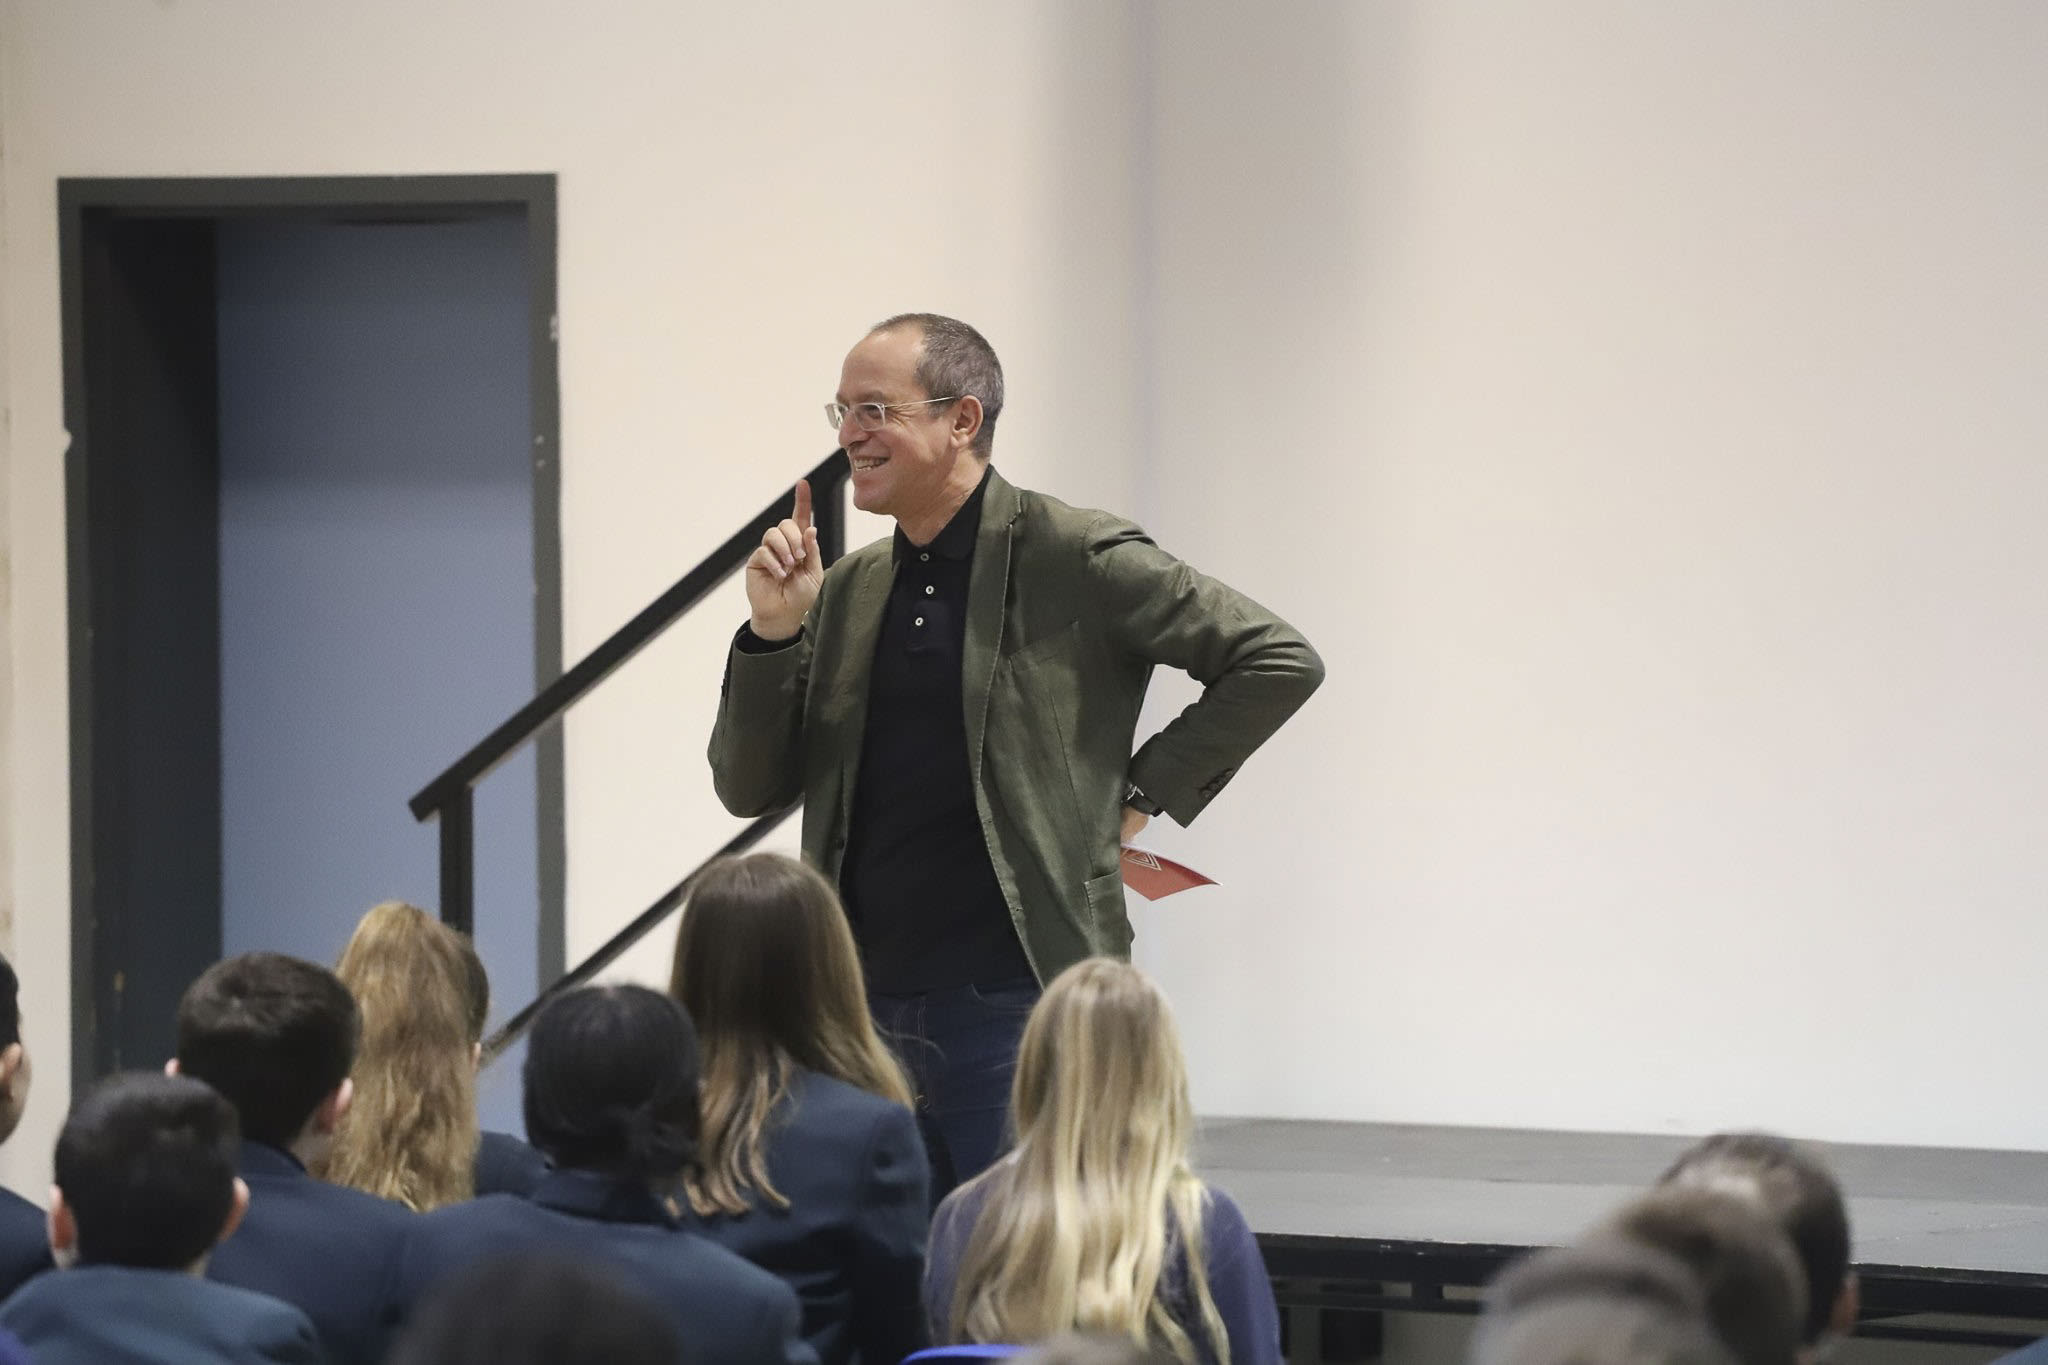 Shai Weiss, Virgin Atlantic CEO, speaking to students at Crawley’s Thomas Bennett Community College in February 2020